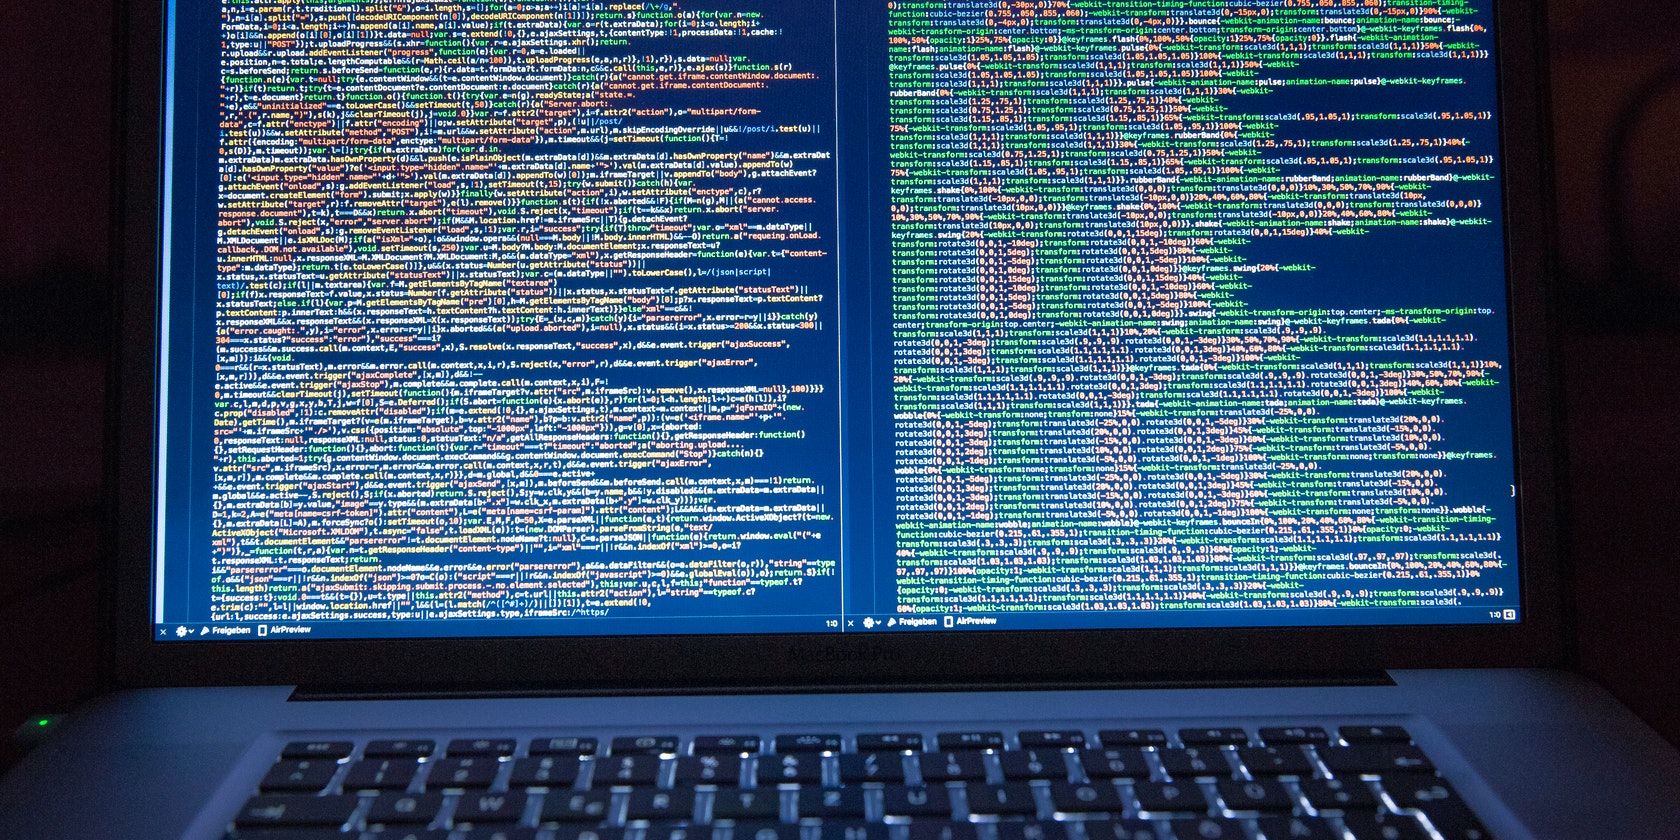 A close-up of a laptop screen showing lines of source code in two windows side-by-side